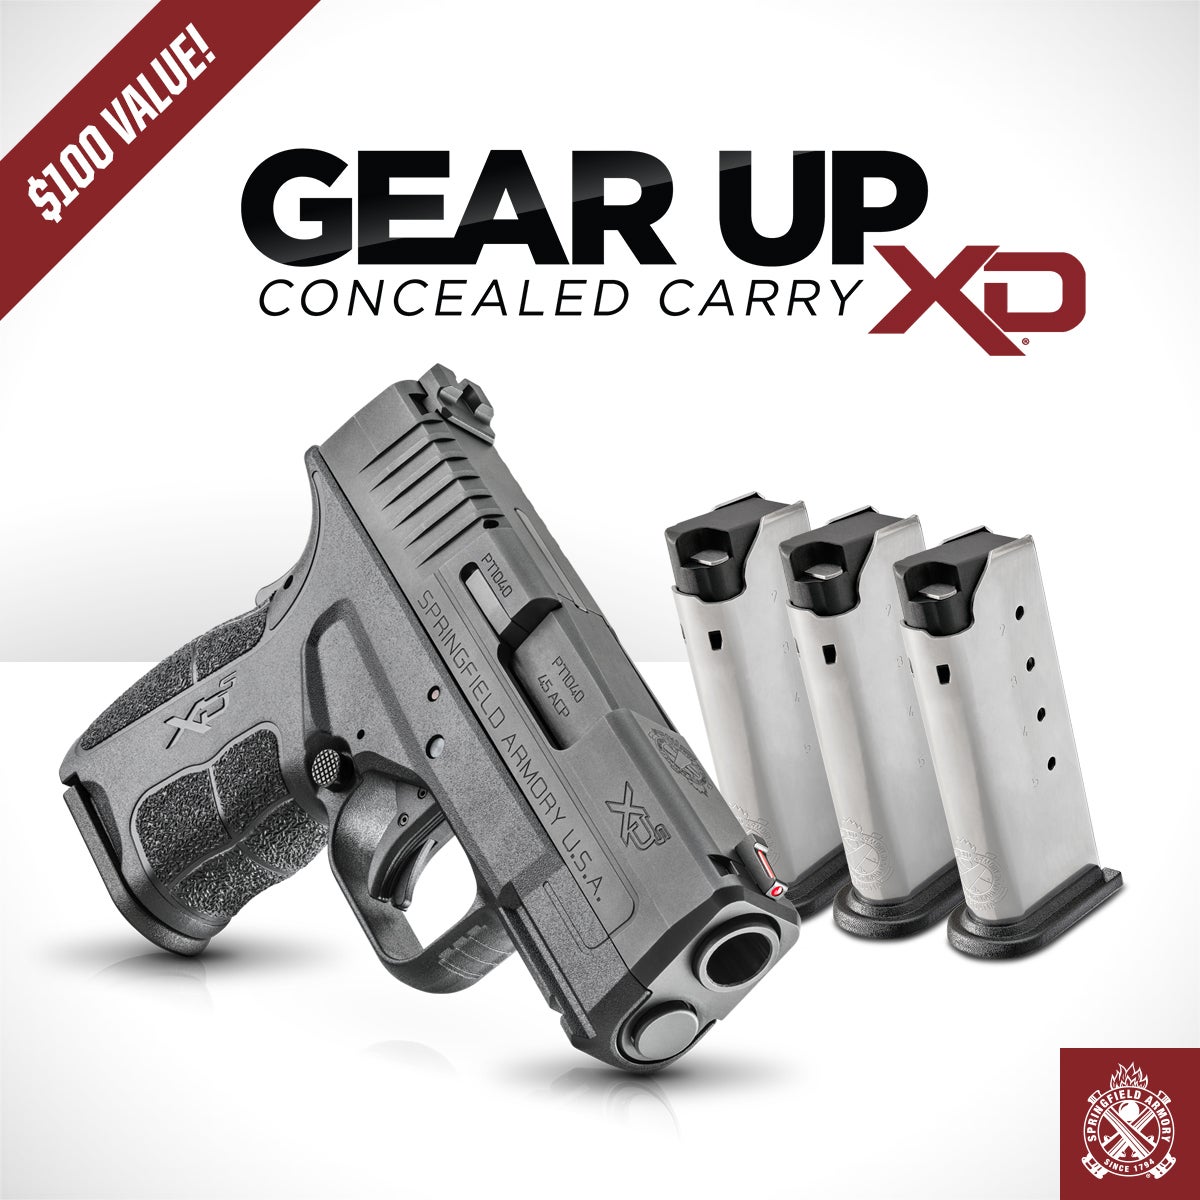 Springfield Armory Announces Their Latest Gear Up Pacakage Gear Up